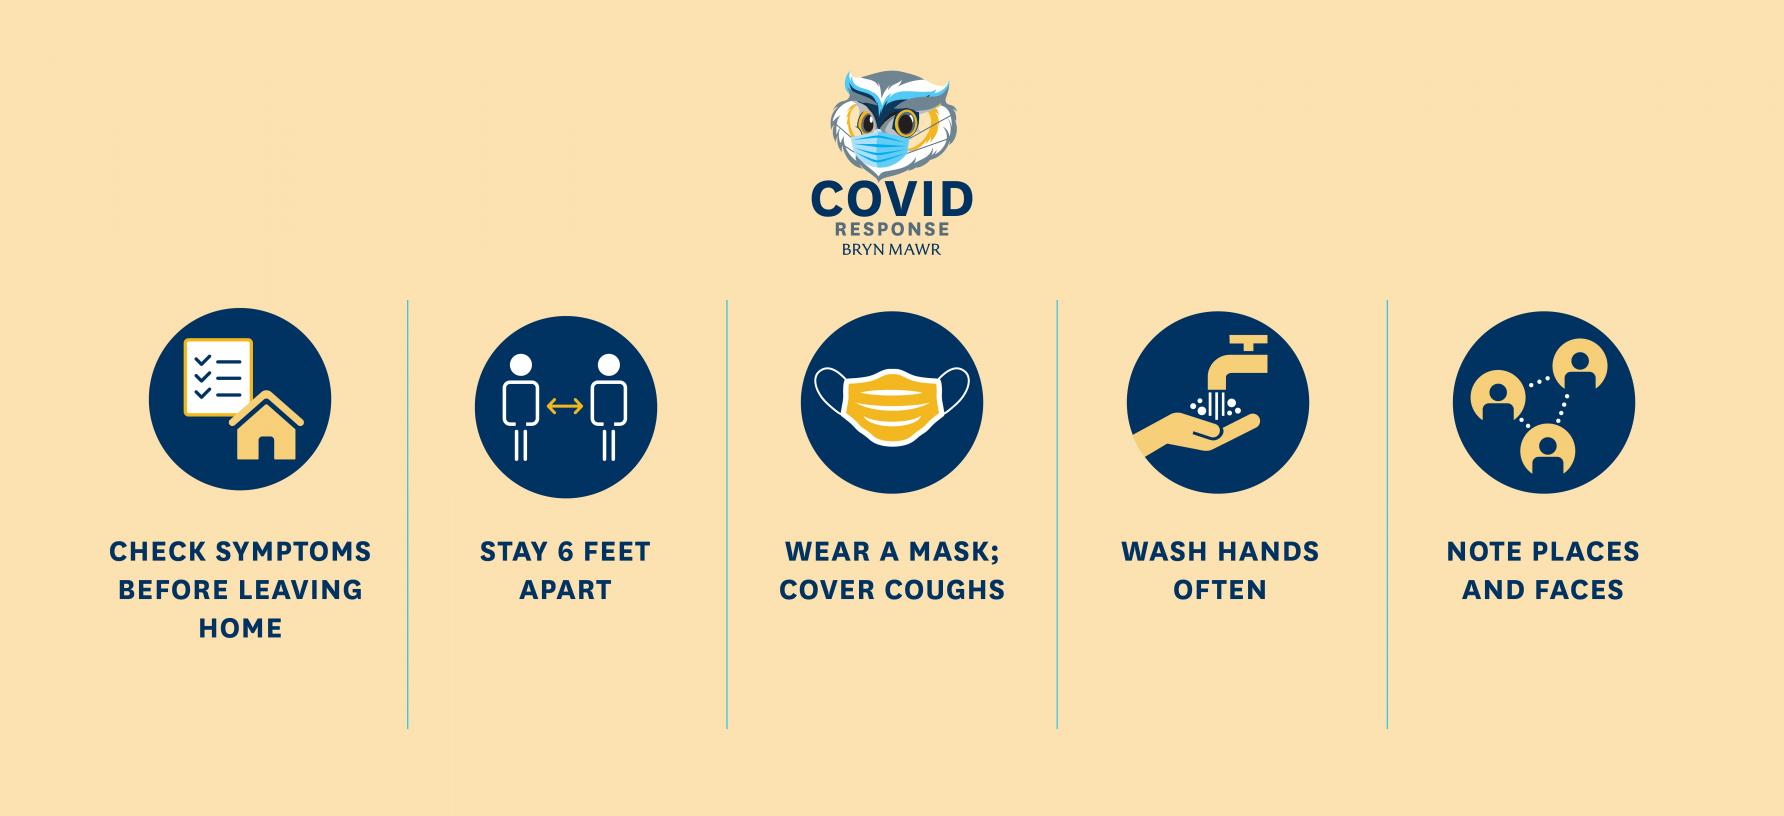 Bryn Mawr students frustrated by inconsistent COVID precautions, lack of transparency